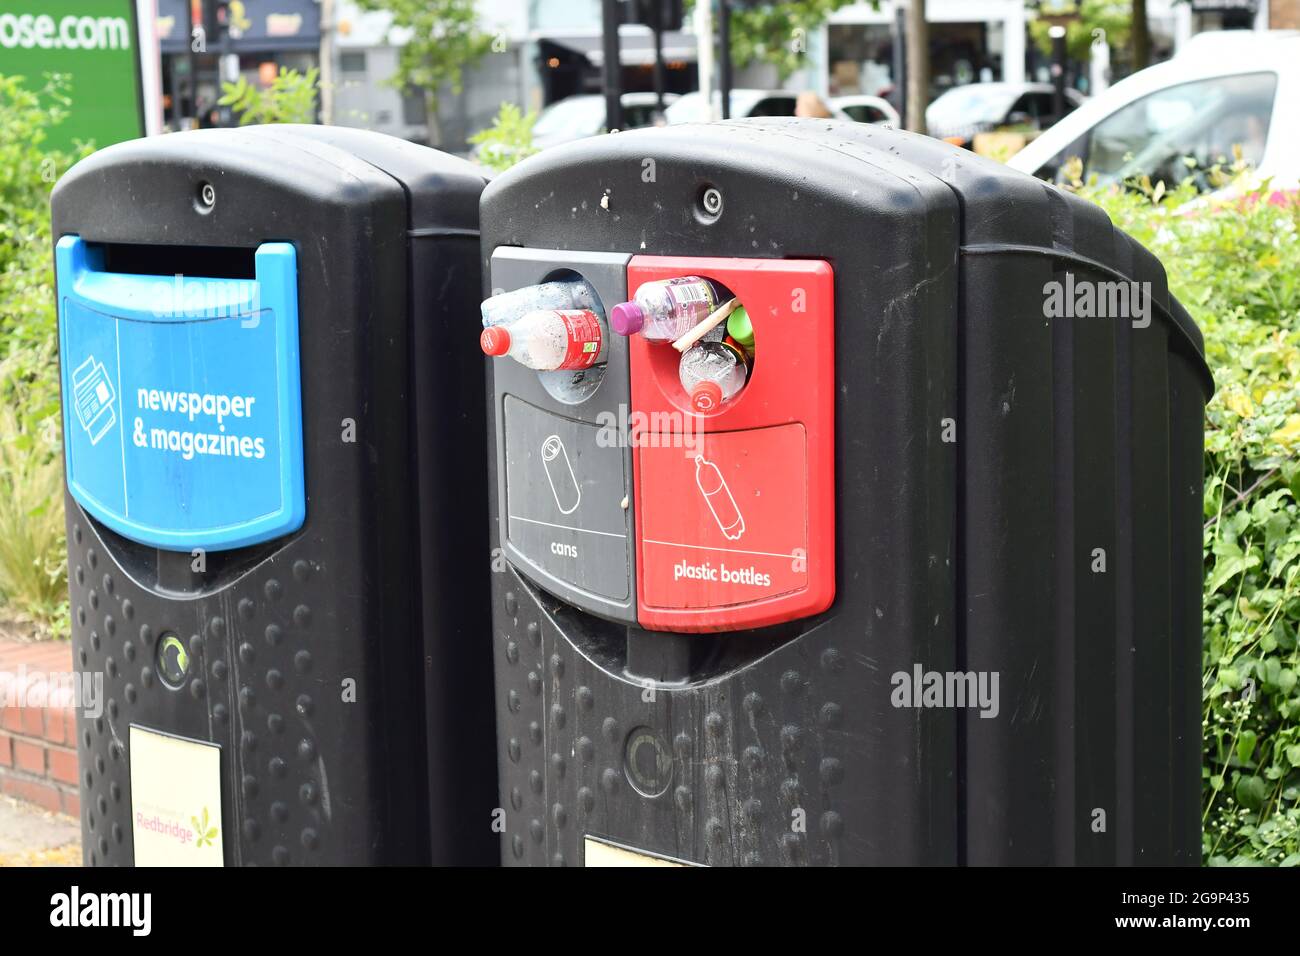 Newspaper and magazines recycling bin and an overflowing cans and plastic bottle recycling bin Stock Photo